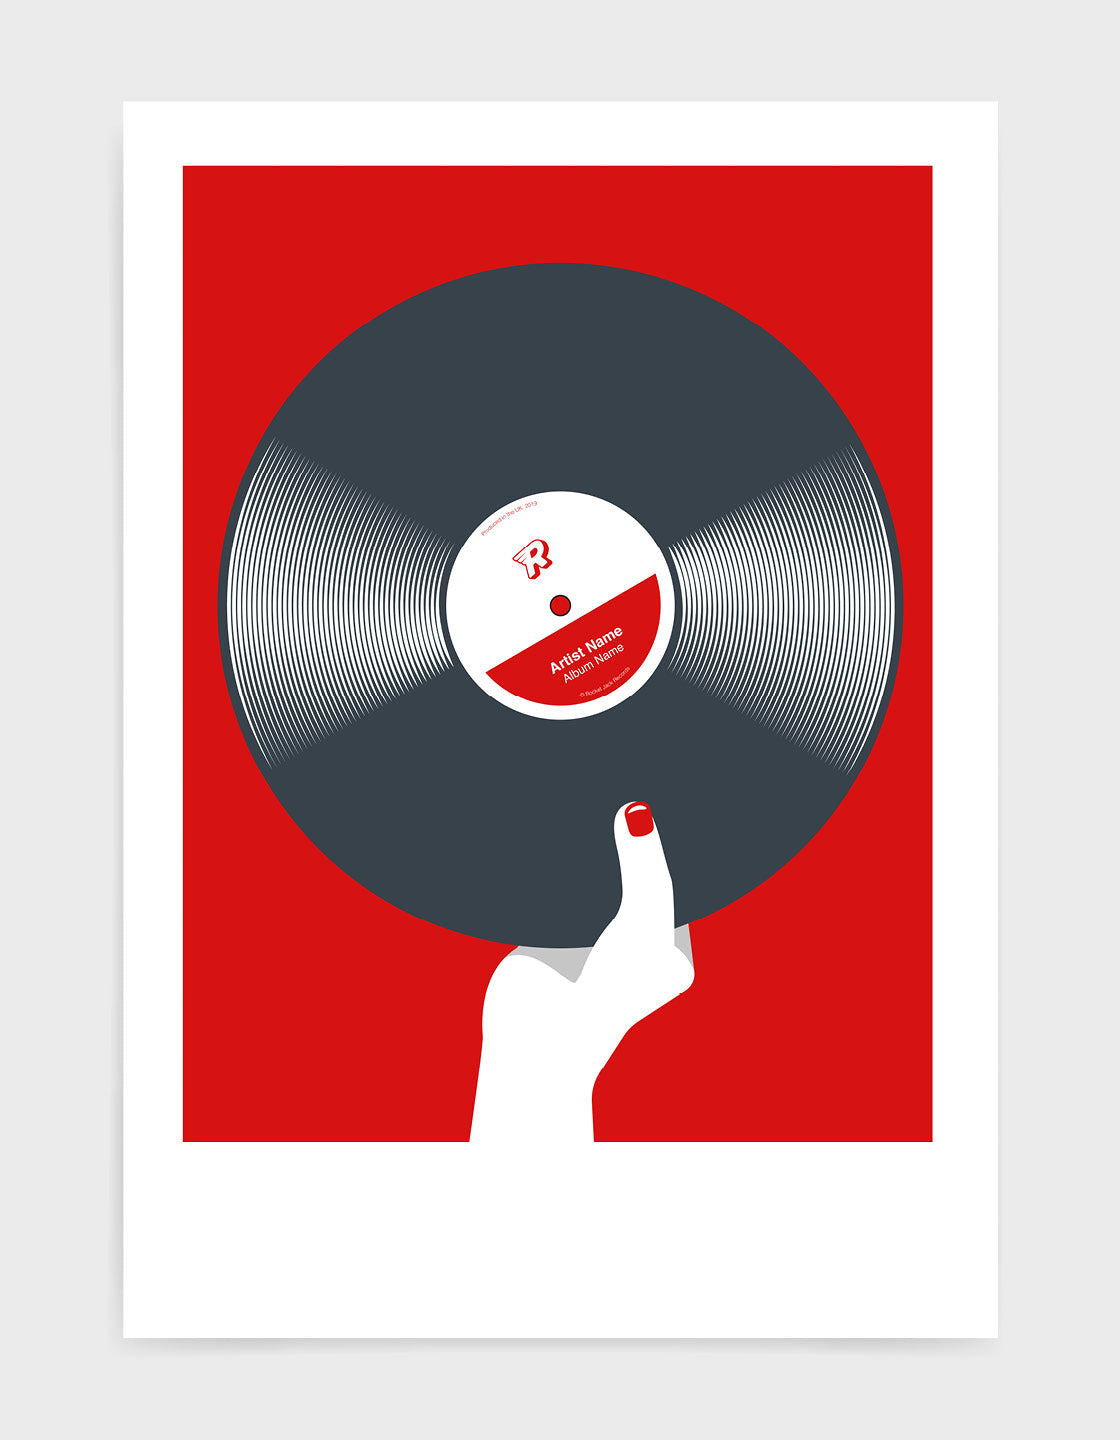 art print image of a Personalised black vinyl record held in a hand with red nails against a red ackground